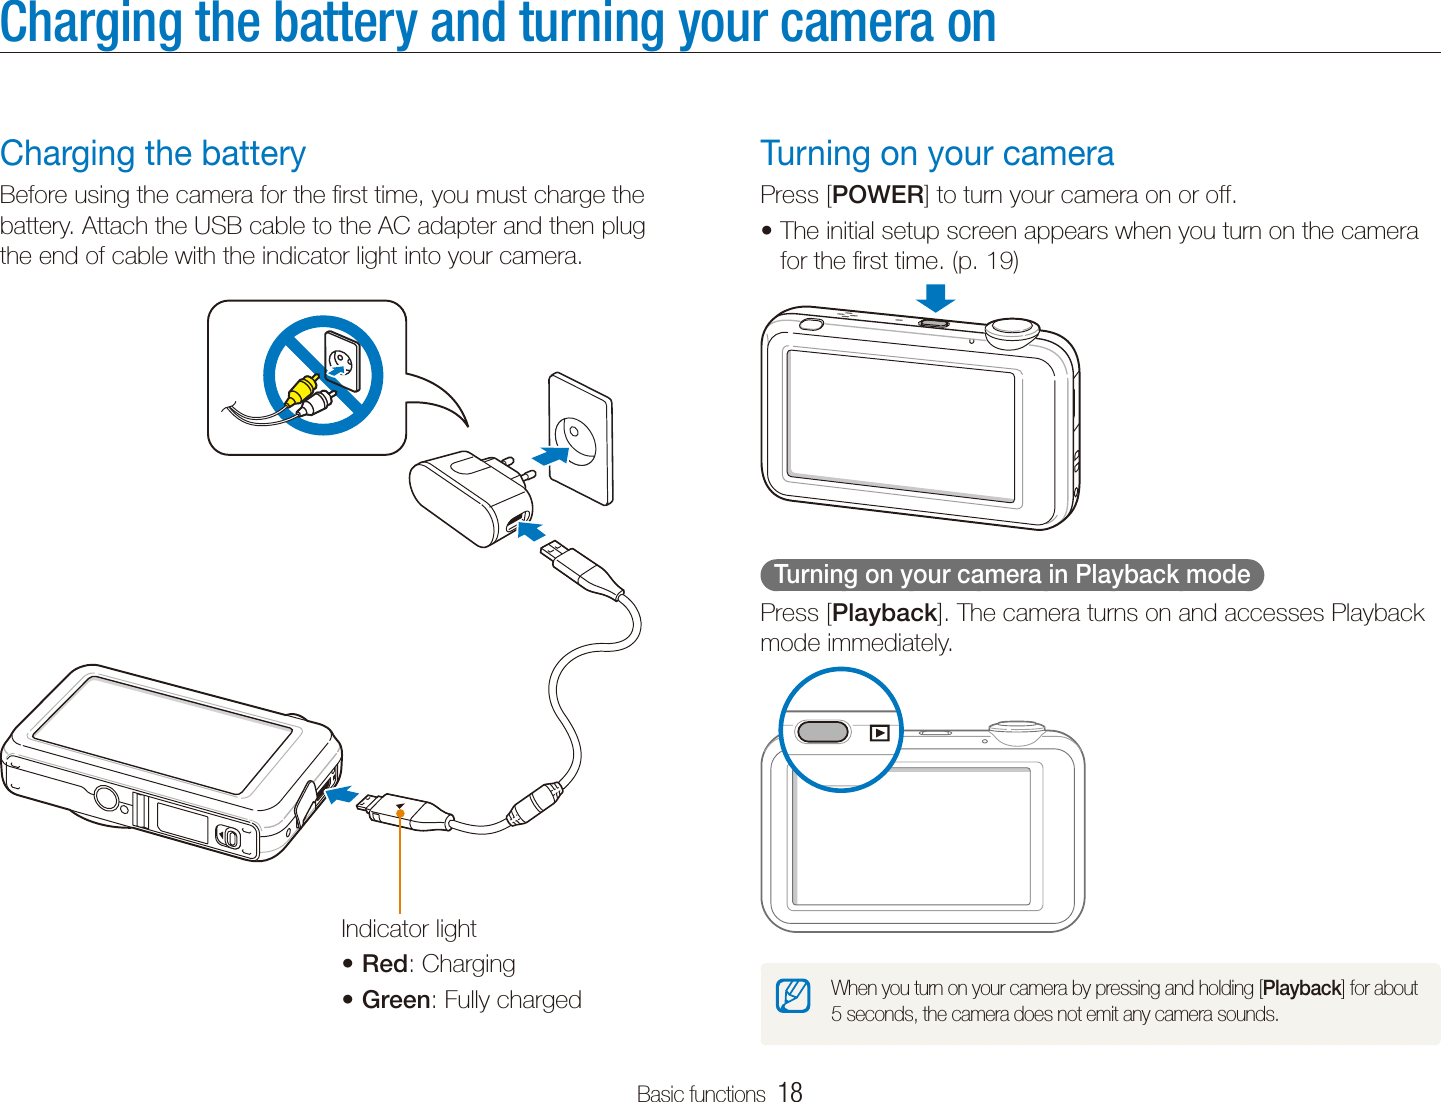 Basic functions  18Charging the battery and turning your camera onTurning on your cameraPress [POWER] to turn your camera on or off.The initial setup screen appears when you turn on the camera tfor the ﬁrst time. (p. 19)  Turning on your camera in Playback mode  Press [Playback]. The camera turns on and accesses Playback mode immediately.When you turn on your camera by pressing and holding [Playback] for about 5 seconds, the camera does not emit any camera sounds.Charging the batteryBefore using the camera for the ﬁrst time, you must charge the battery. Attach the USB cable to the AC adapter and then plug the end of cable with the indicator light into your camera.Indicator lightRedt : ChargingGreent : Fully charged